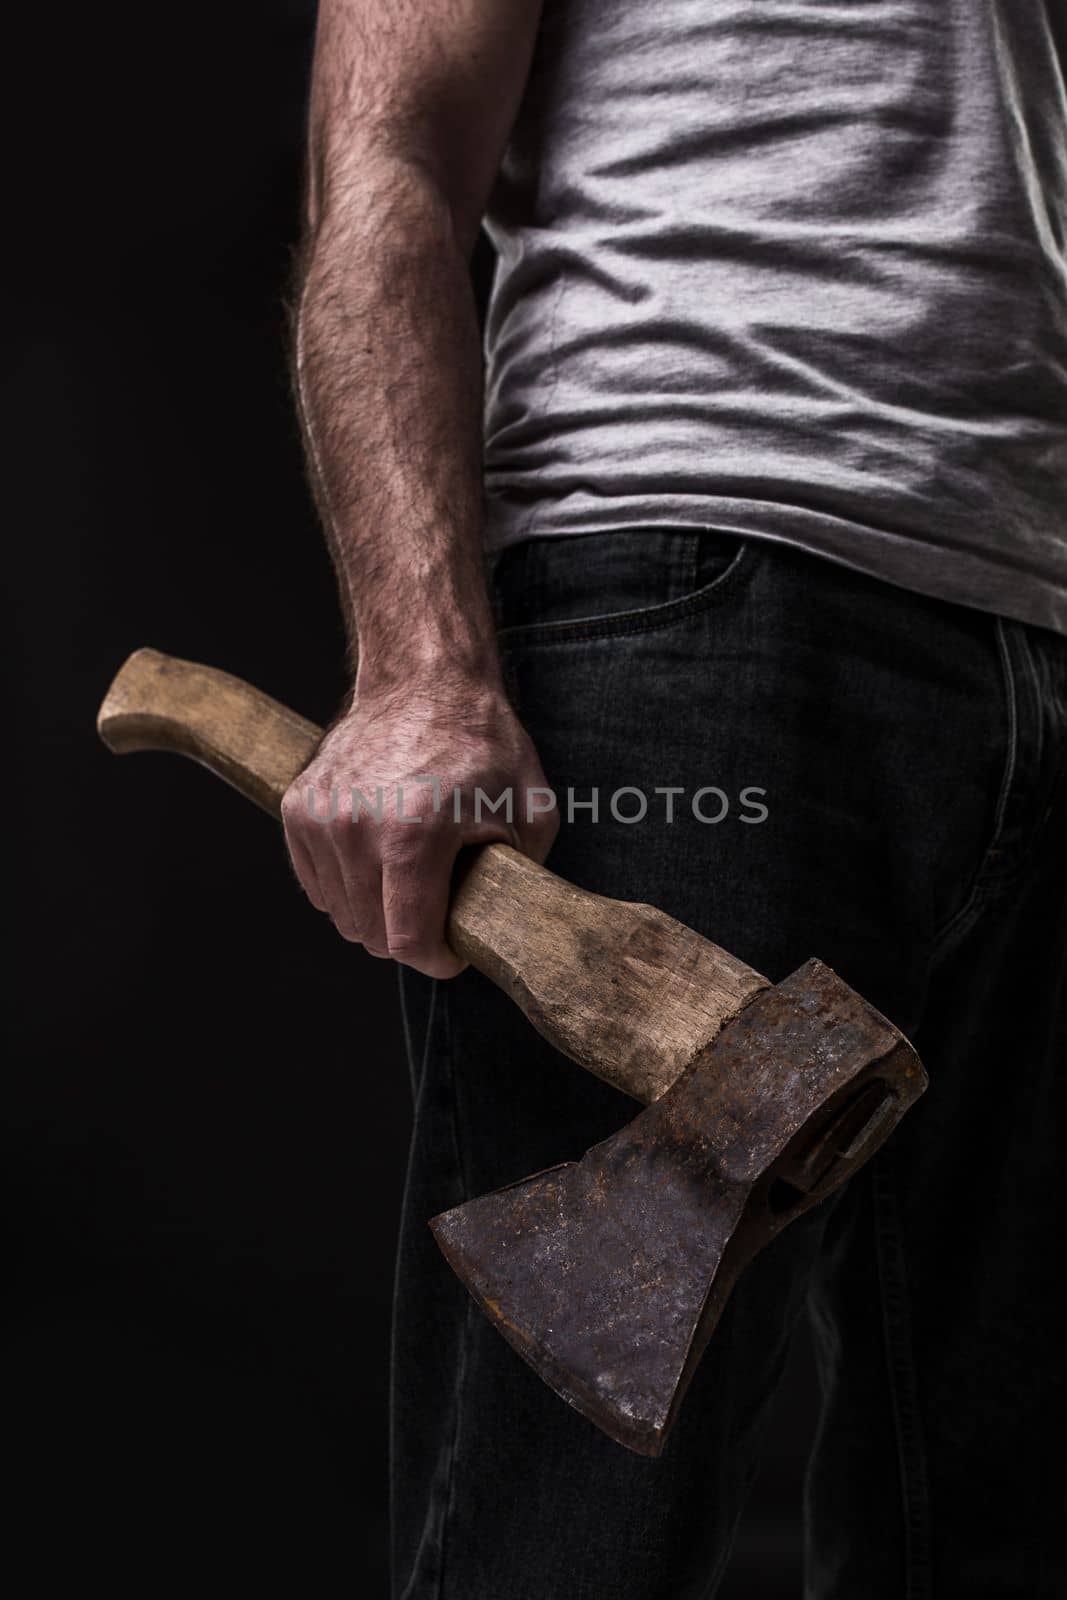 A man holds an ax in his hands against on black background. Criminal